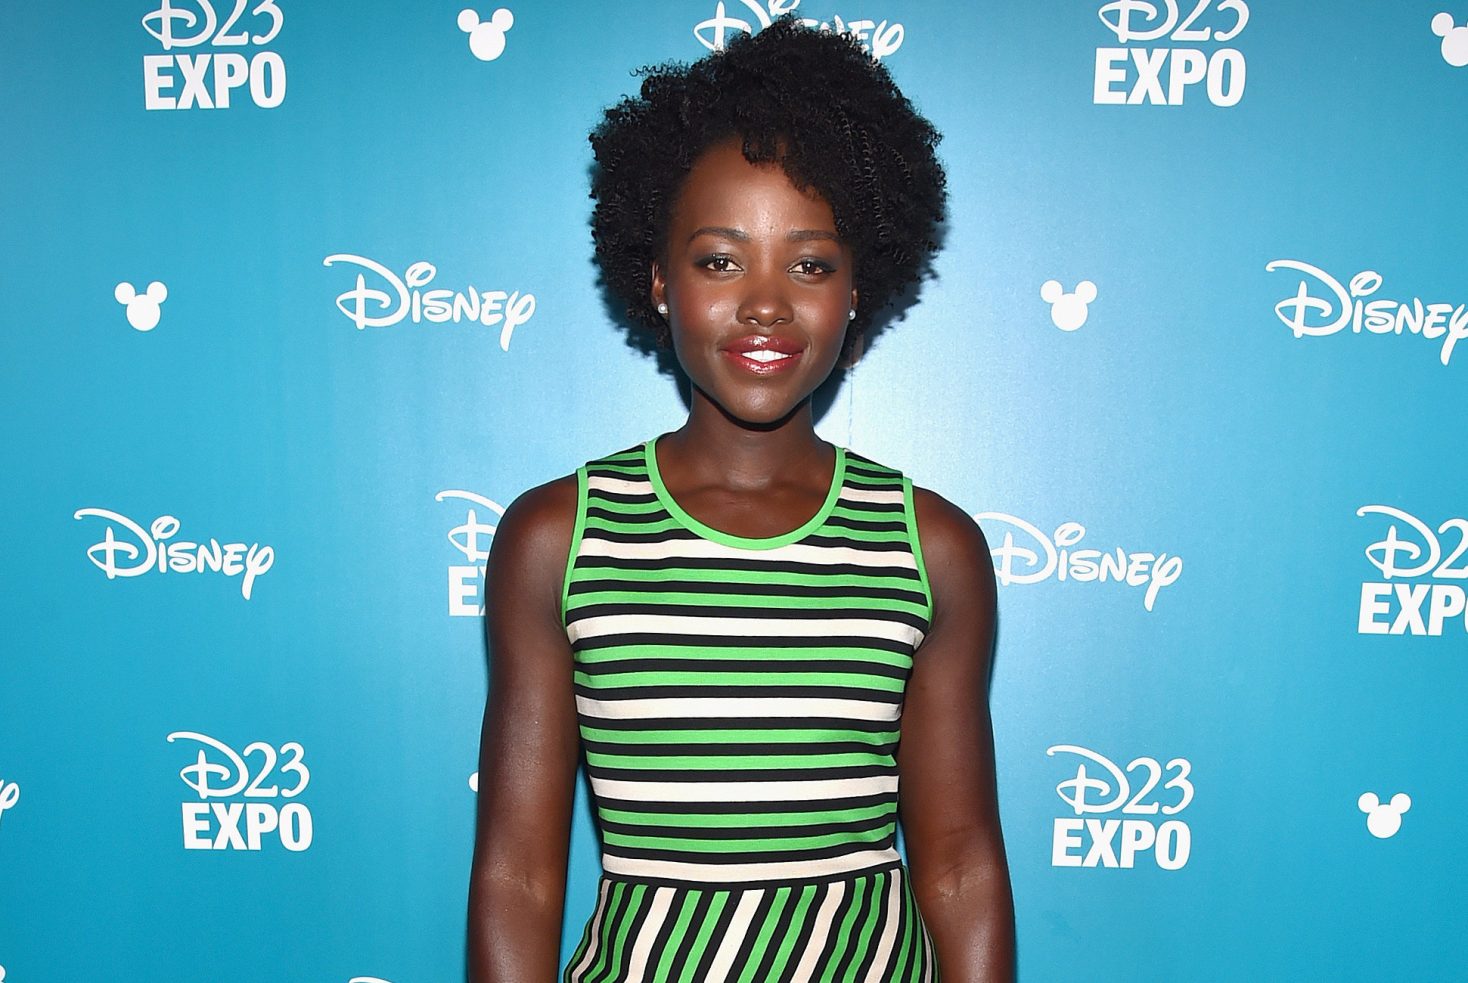 Lupita Nyong’o Now Officially an A-lister, Her Movies Have Grossed Over $3 Billion Worldwide!